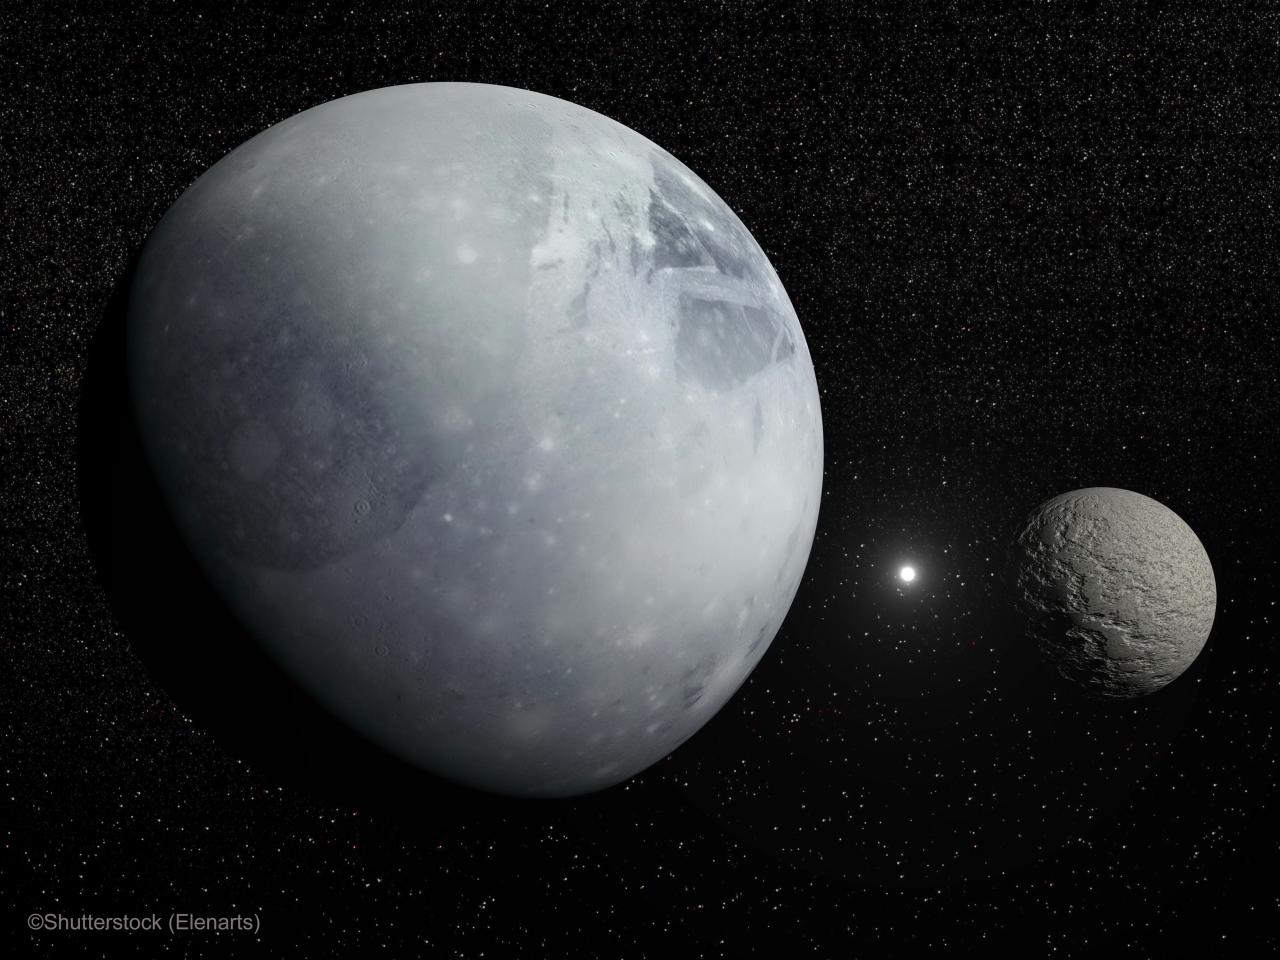 Pluton, its big moon Charon and Polaris star in dark starry background - Elements of this image furnished by NASA